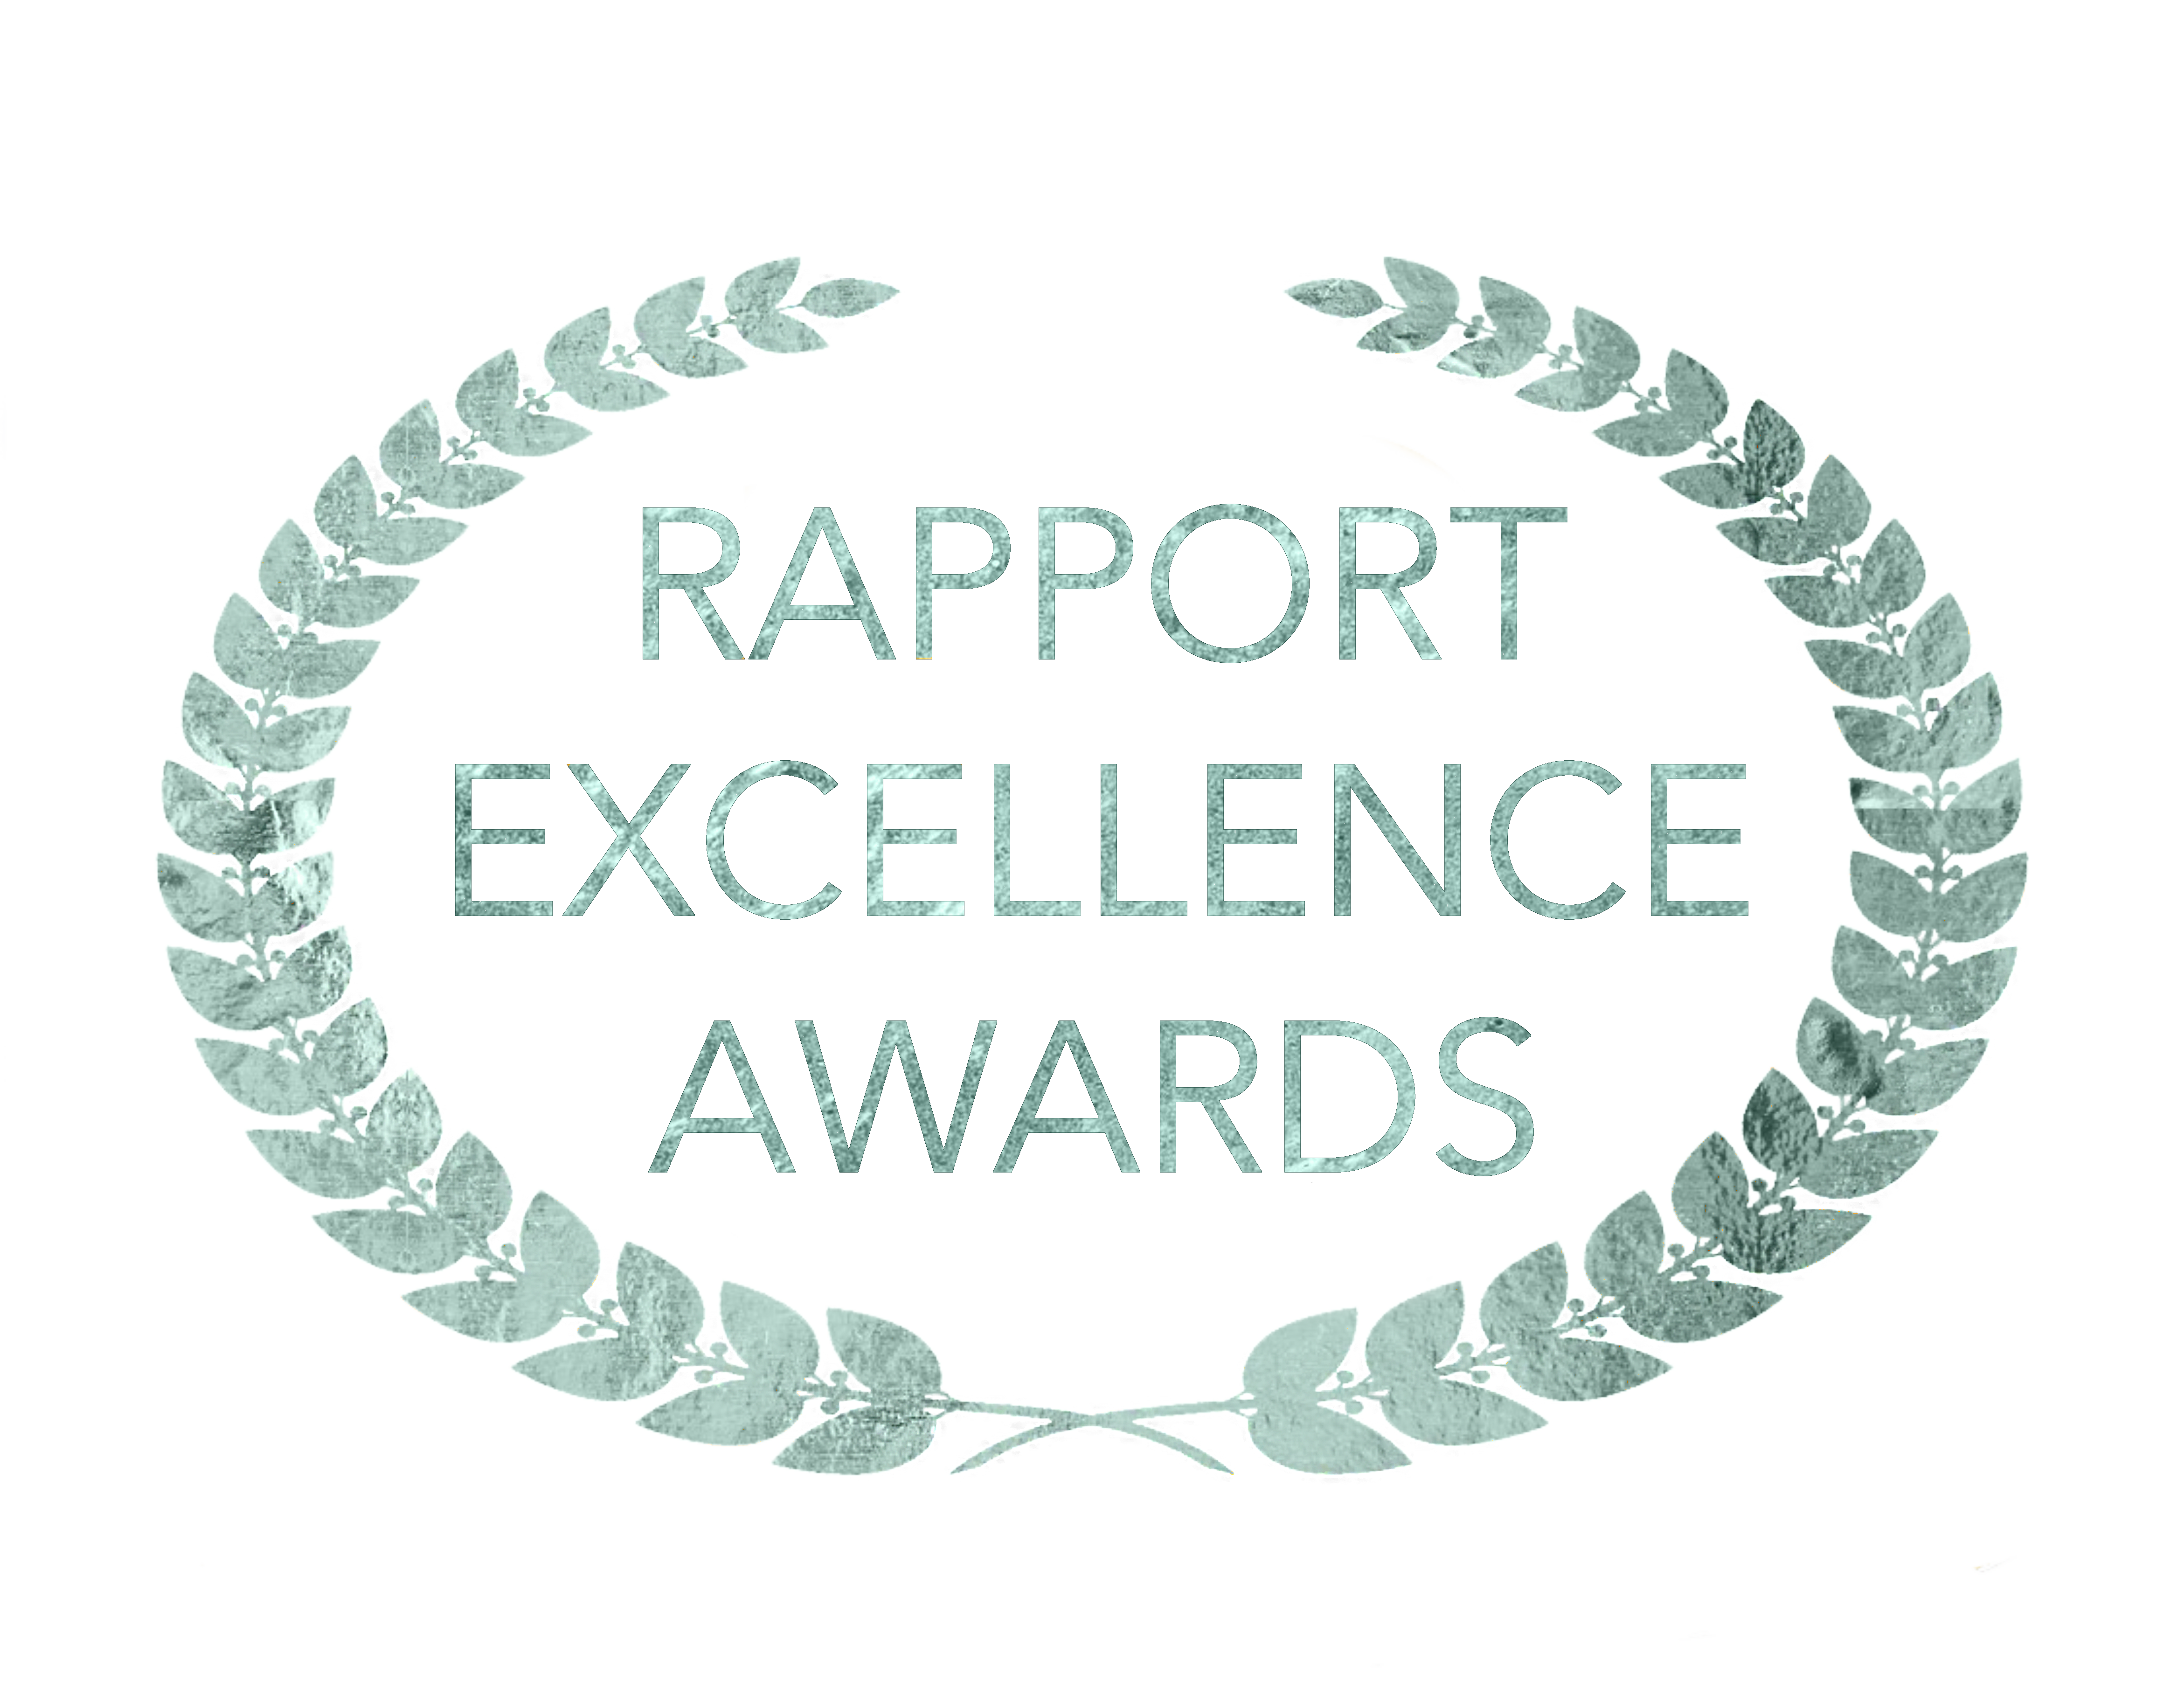 Rapport Excellence Awards